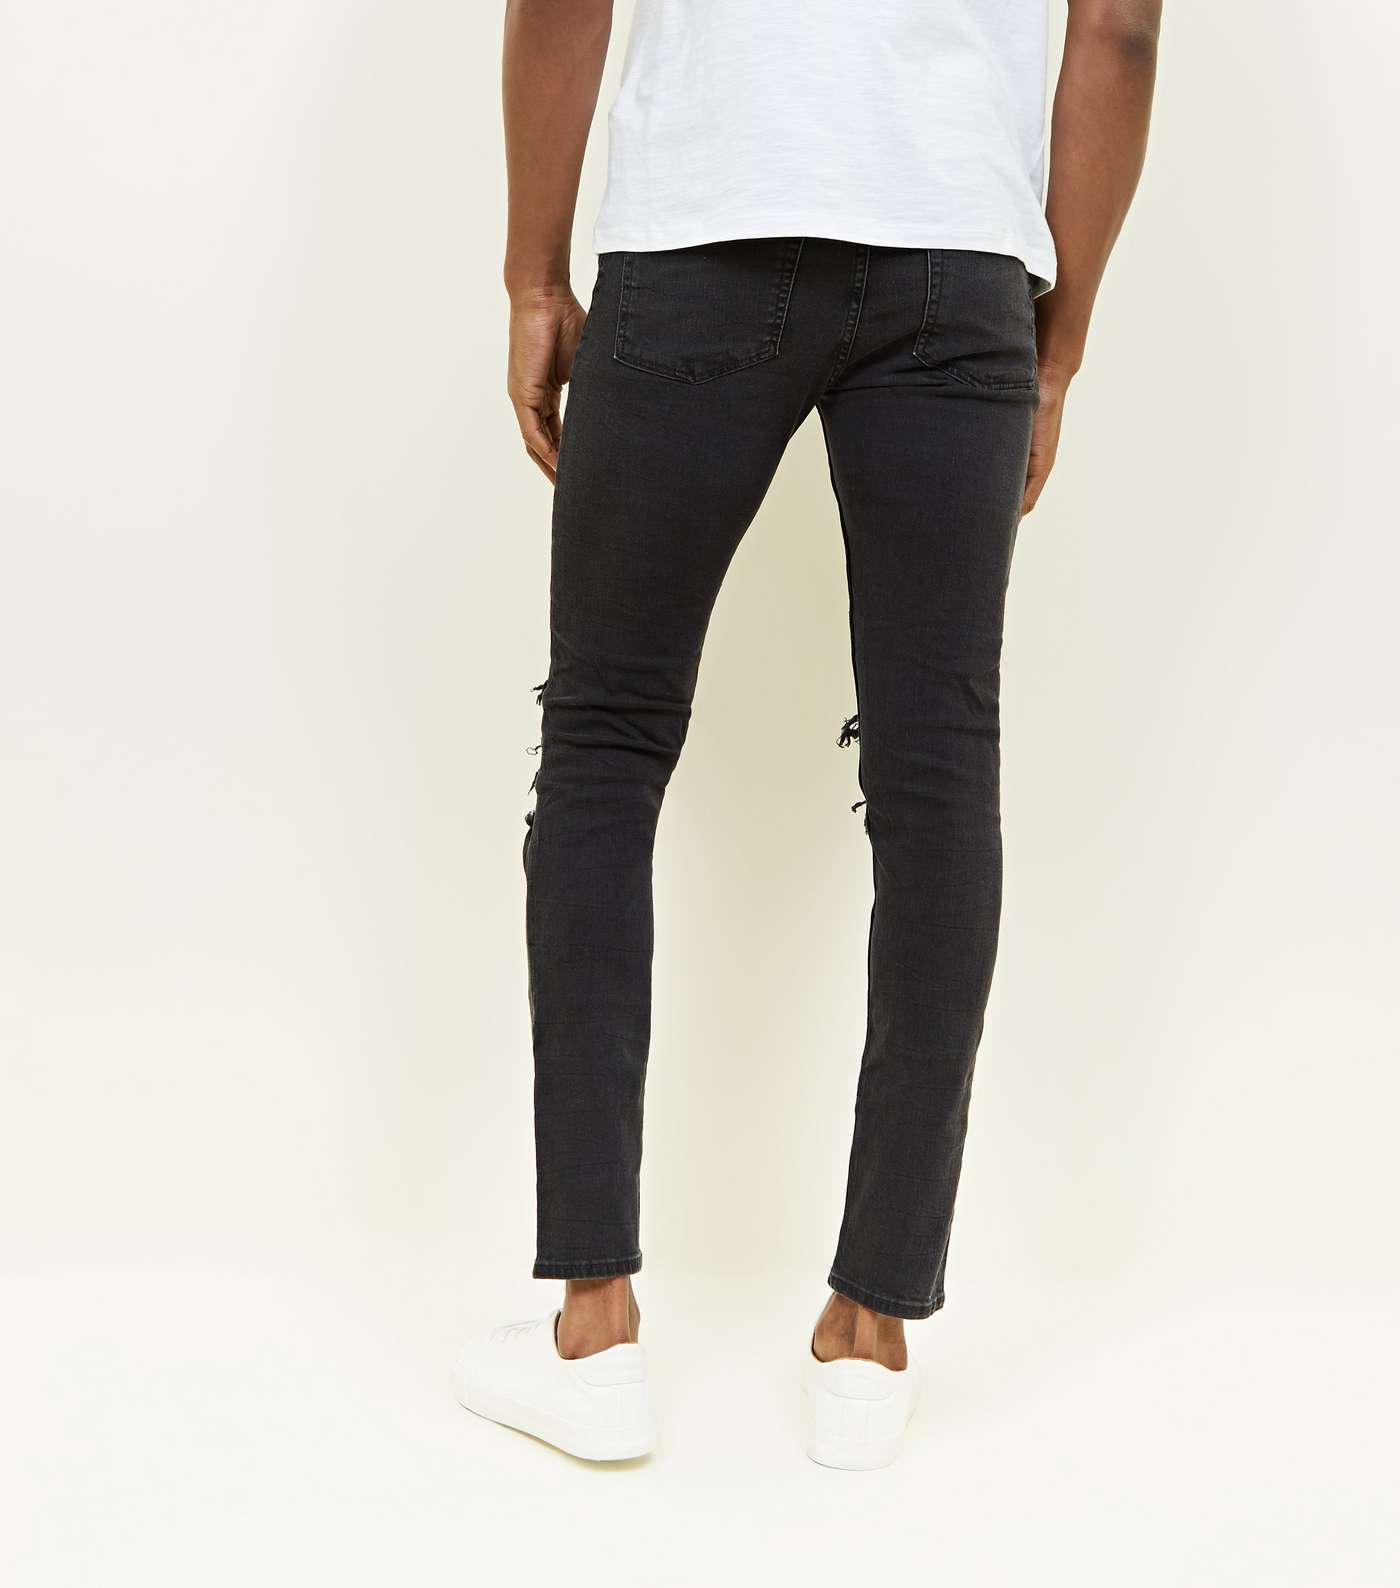 Black Washed Ripped Knee Skinny Jeans Image 3